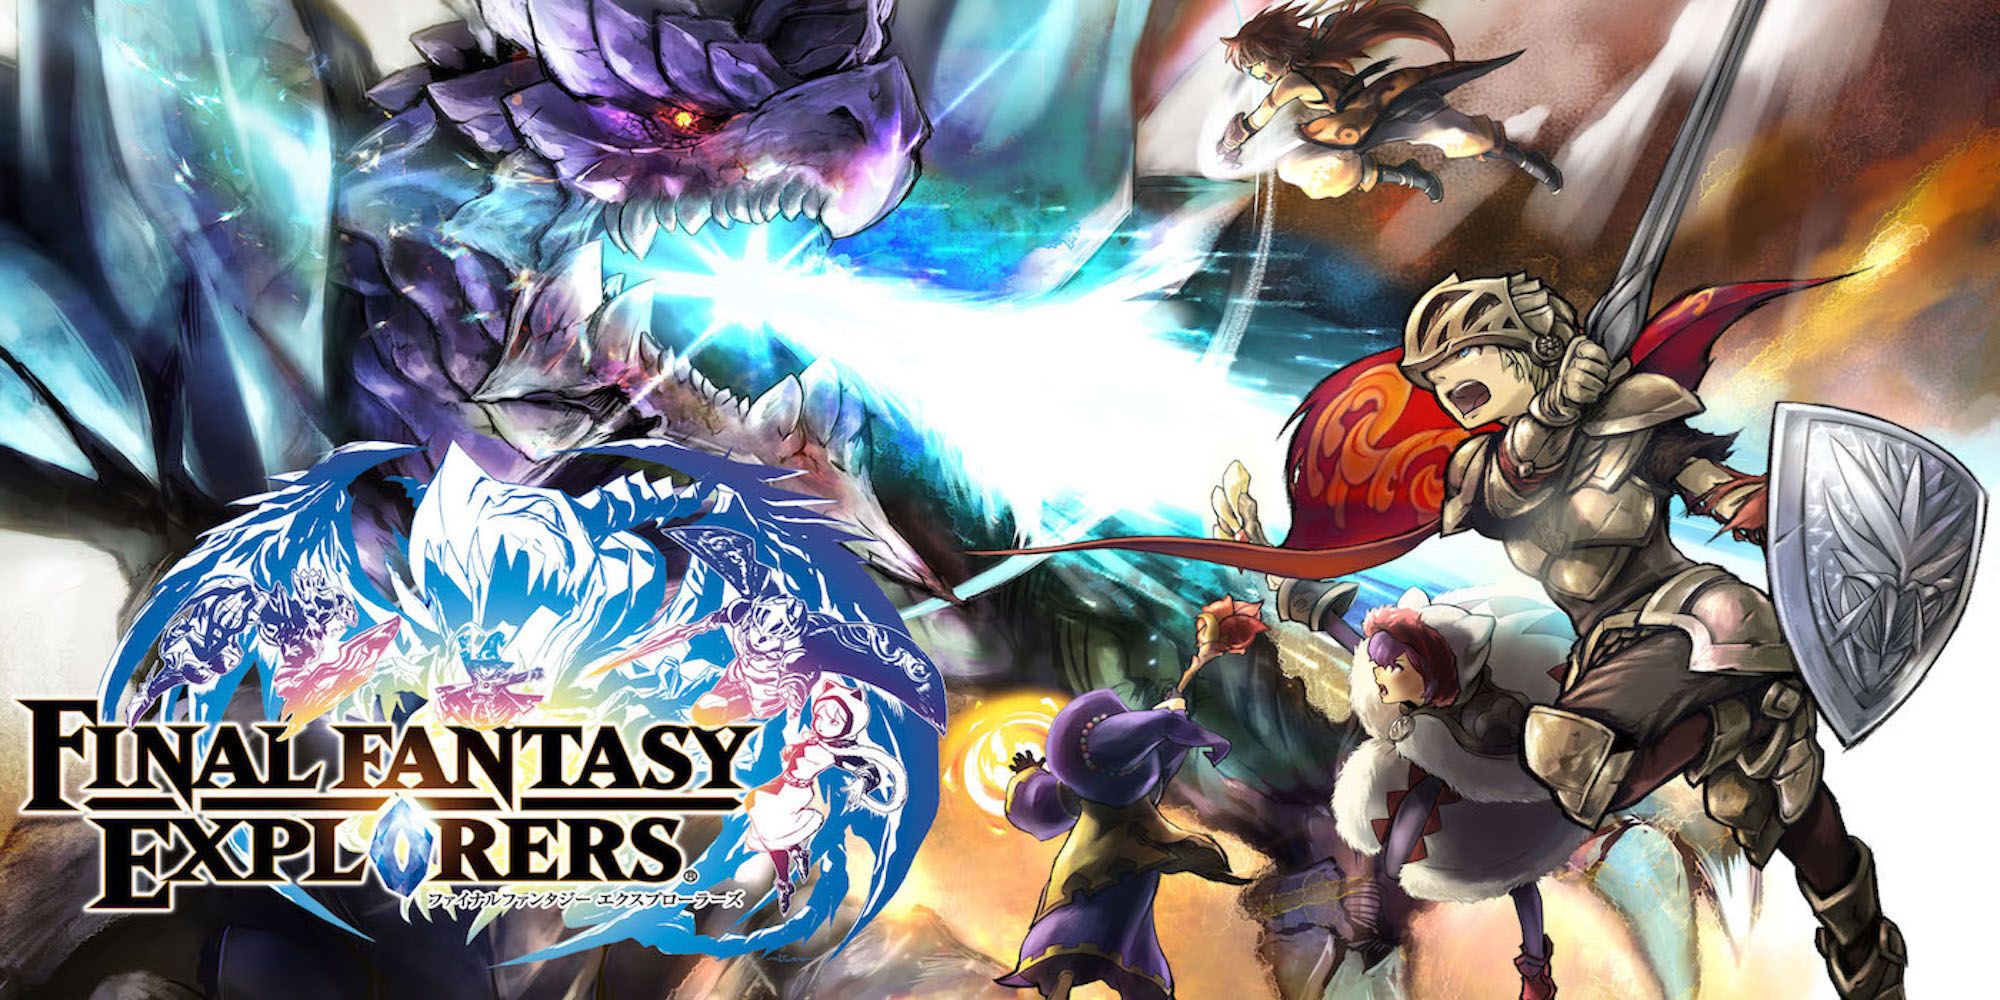 Promo art featuring characters in Final Fantasy Explorers